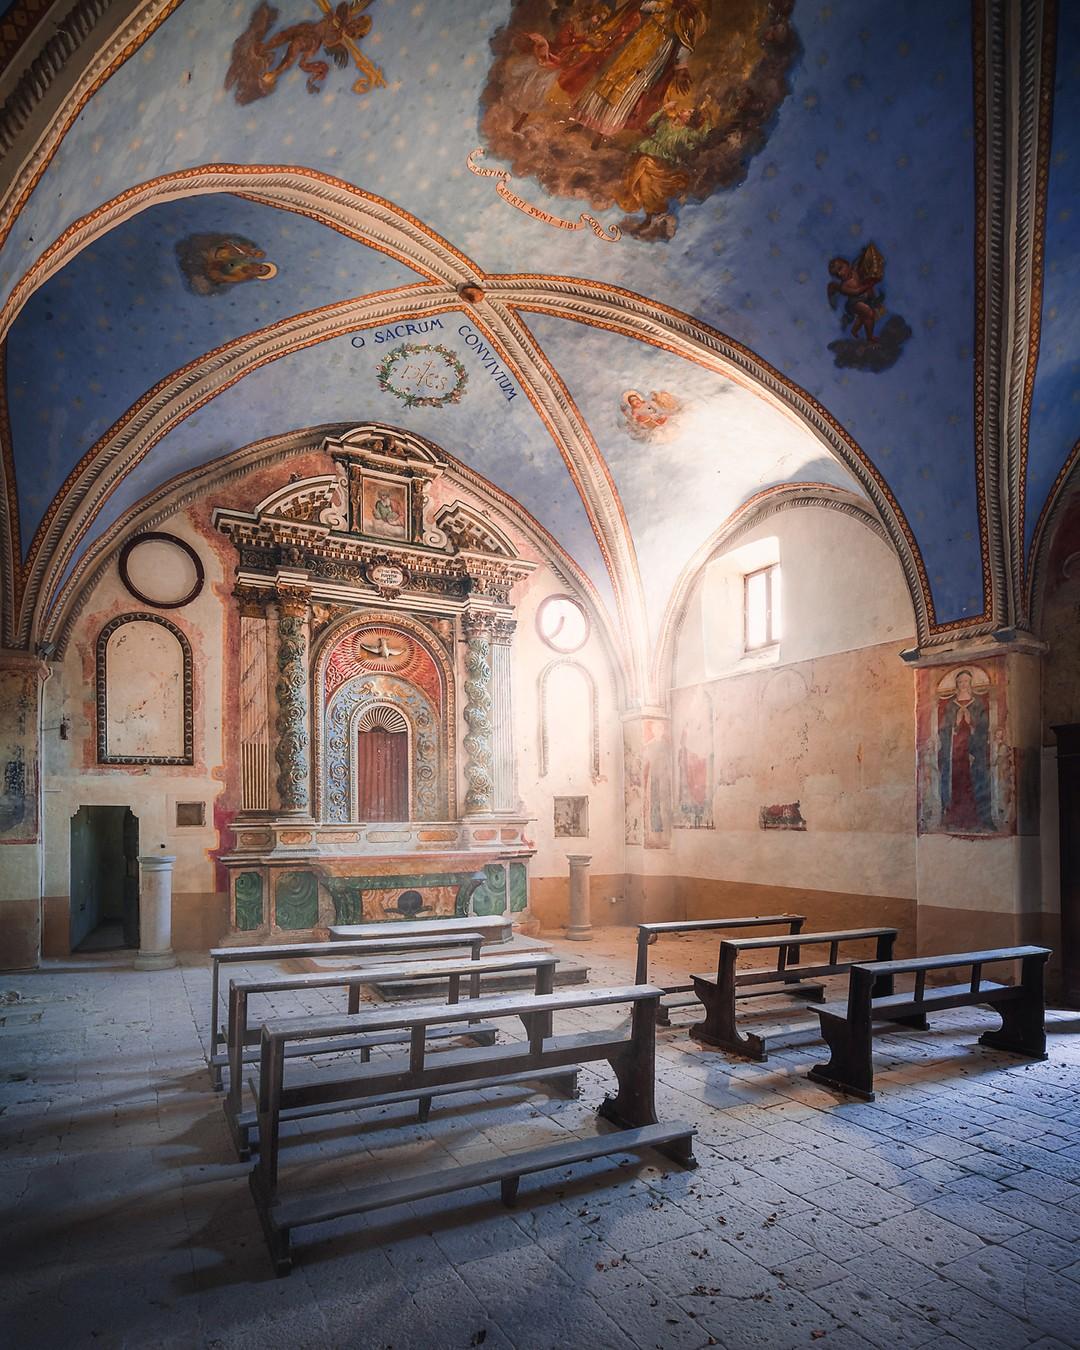 An abandoned church in Italy, parts of which are as old as the 16th century, with additions from the 19th century. (Courtesy of <a href="https://romanrobroek.nl/">Roman Robroek Photography</a> and <a href="https://www.instagram.com/romanrobroek/">@romanrobroek</a>)